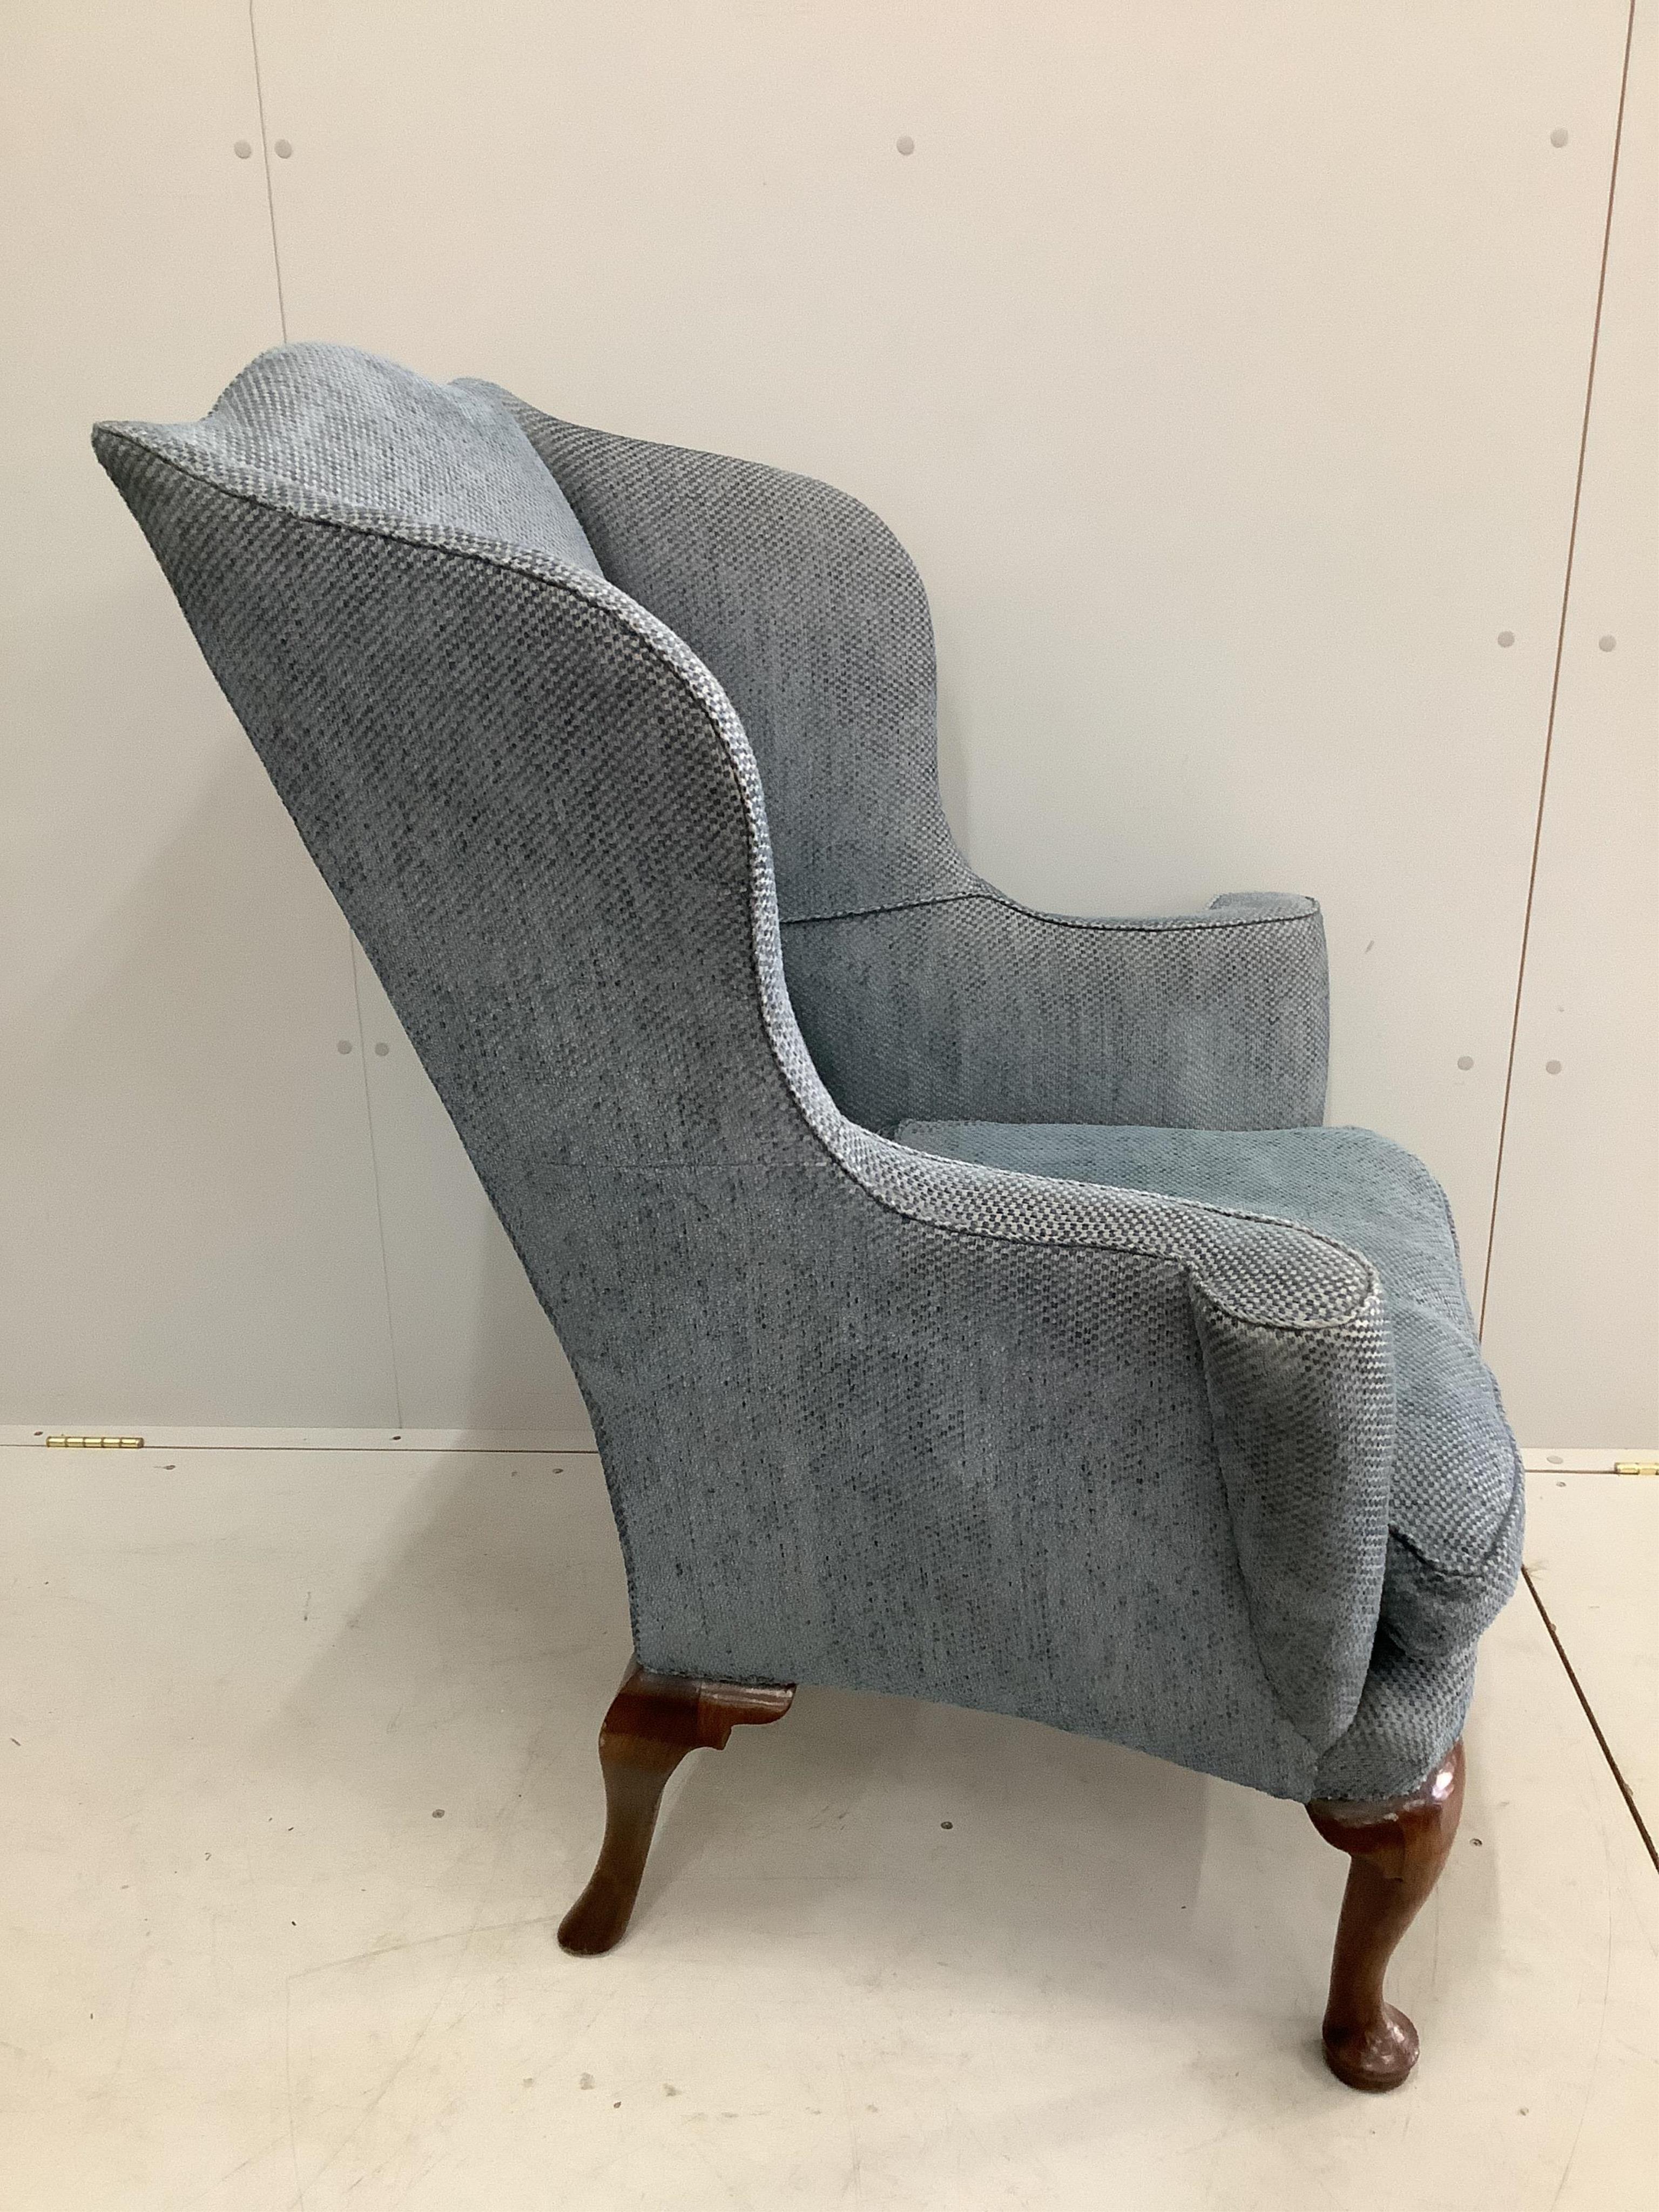 A George I walnut wing armchair, upholstered in blue fabric. Condition - good